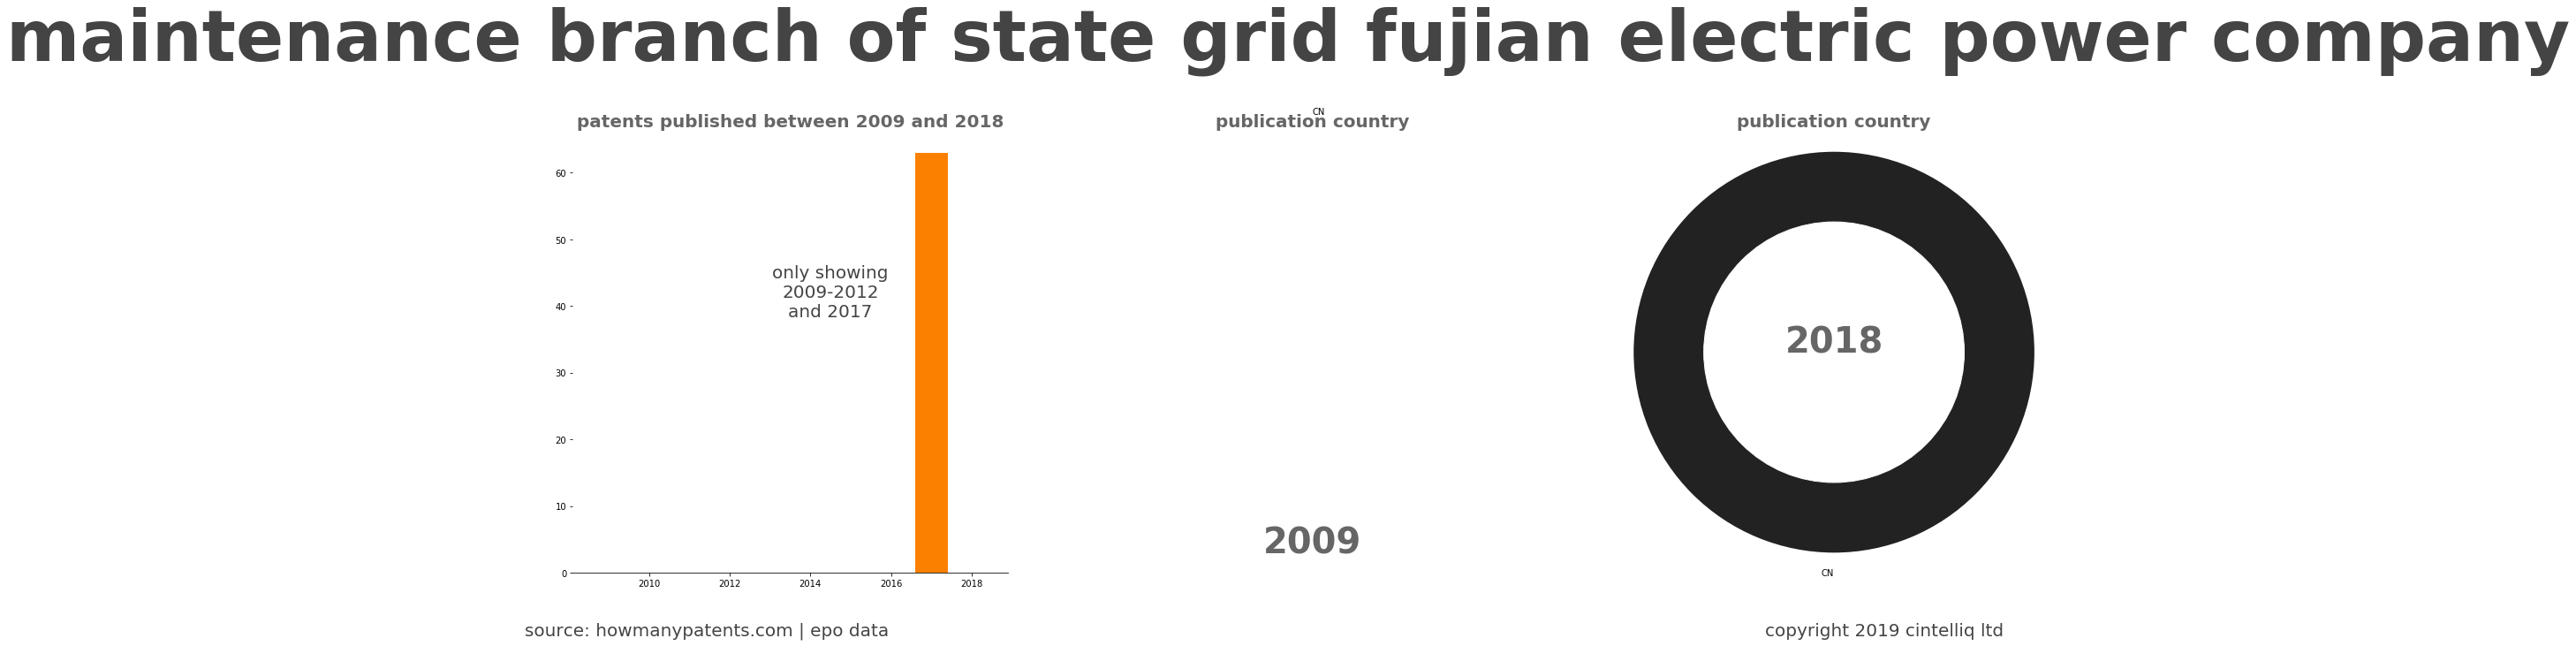 summary of patents for Maintenance Branch Of State Grid Fujian Electric Power Company